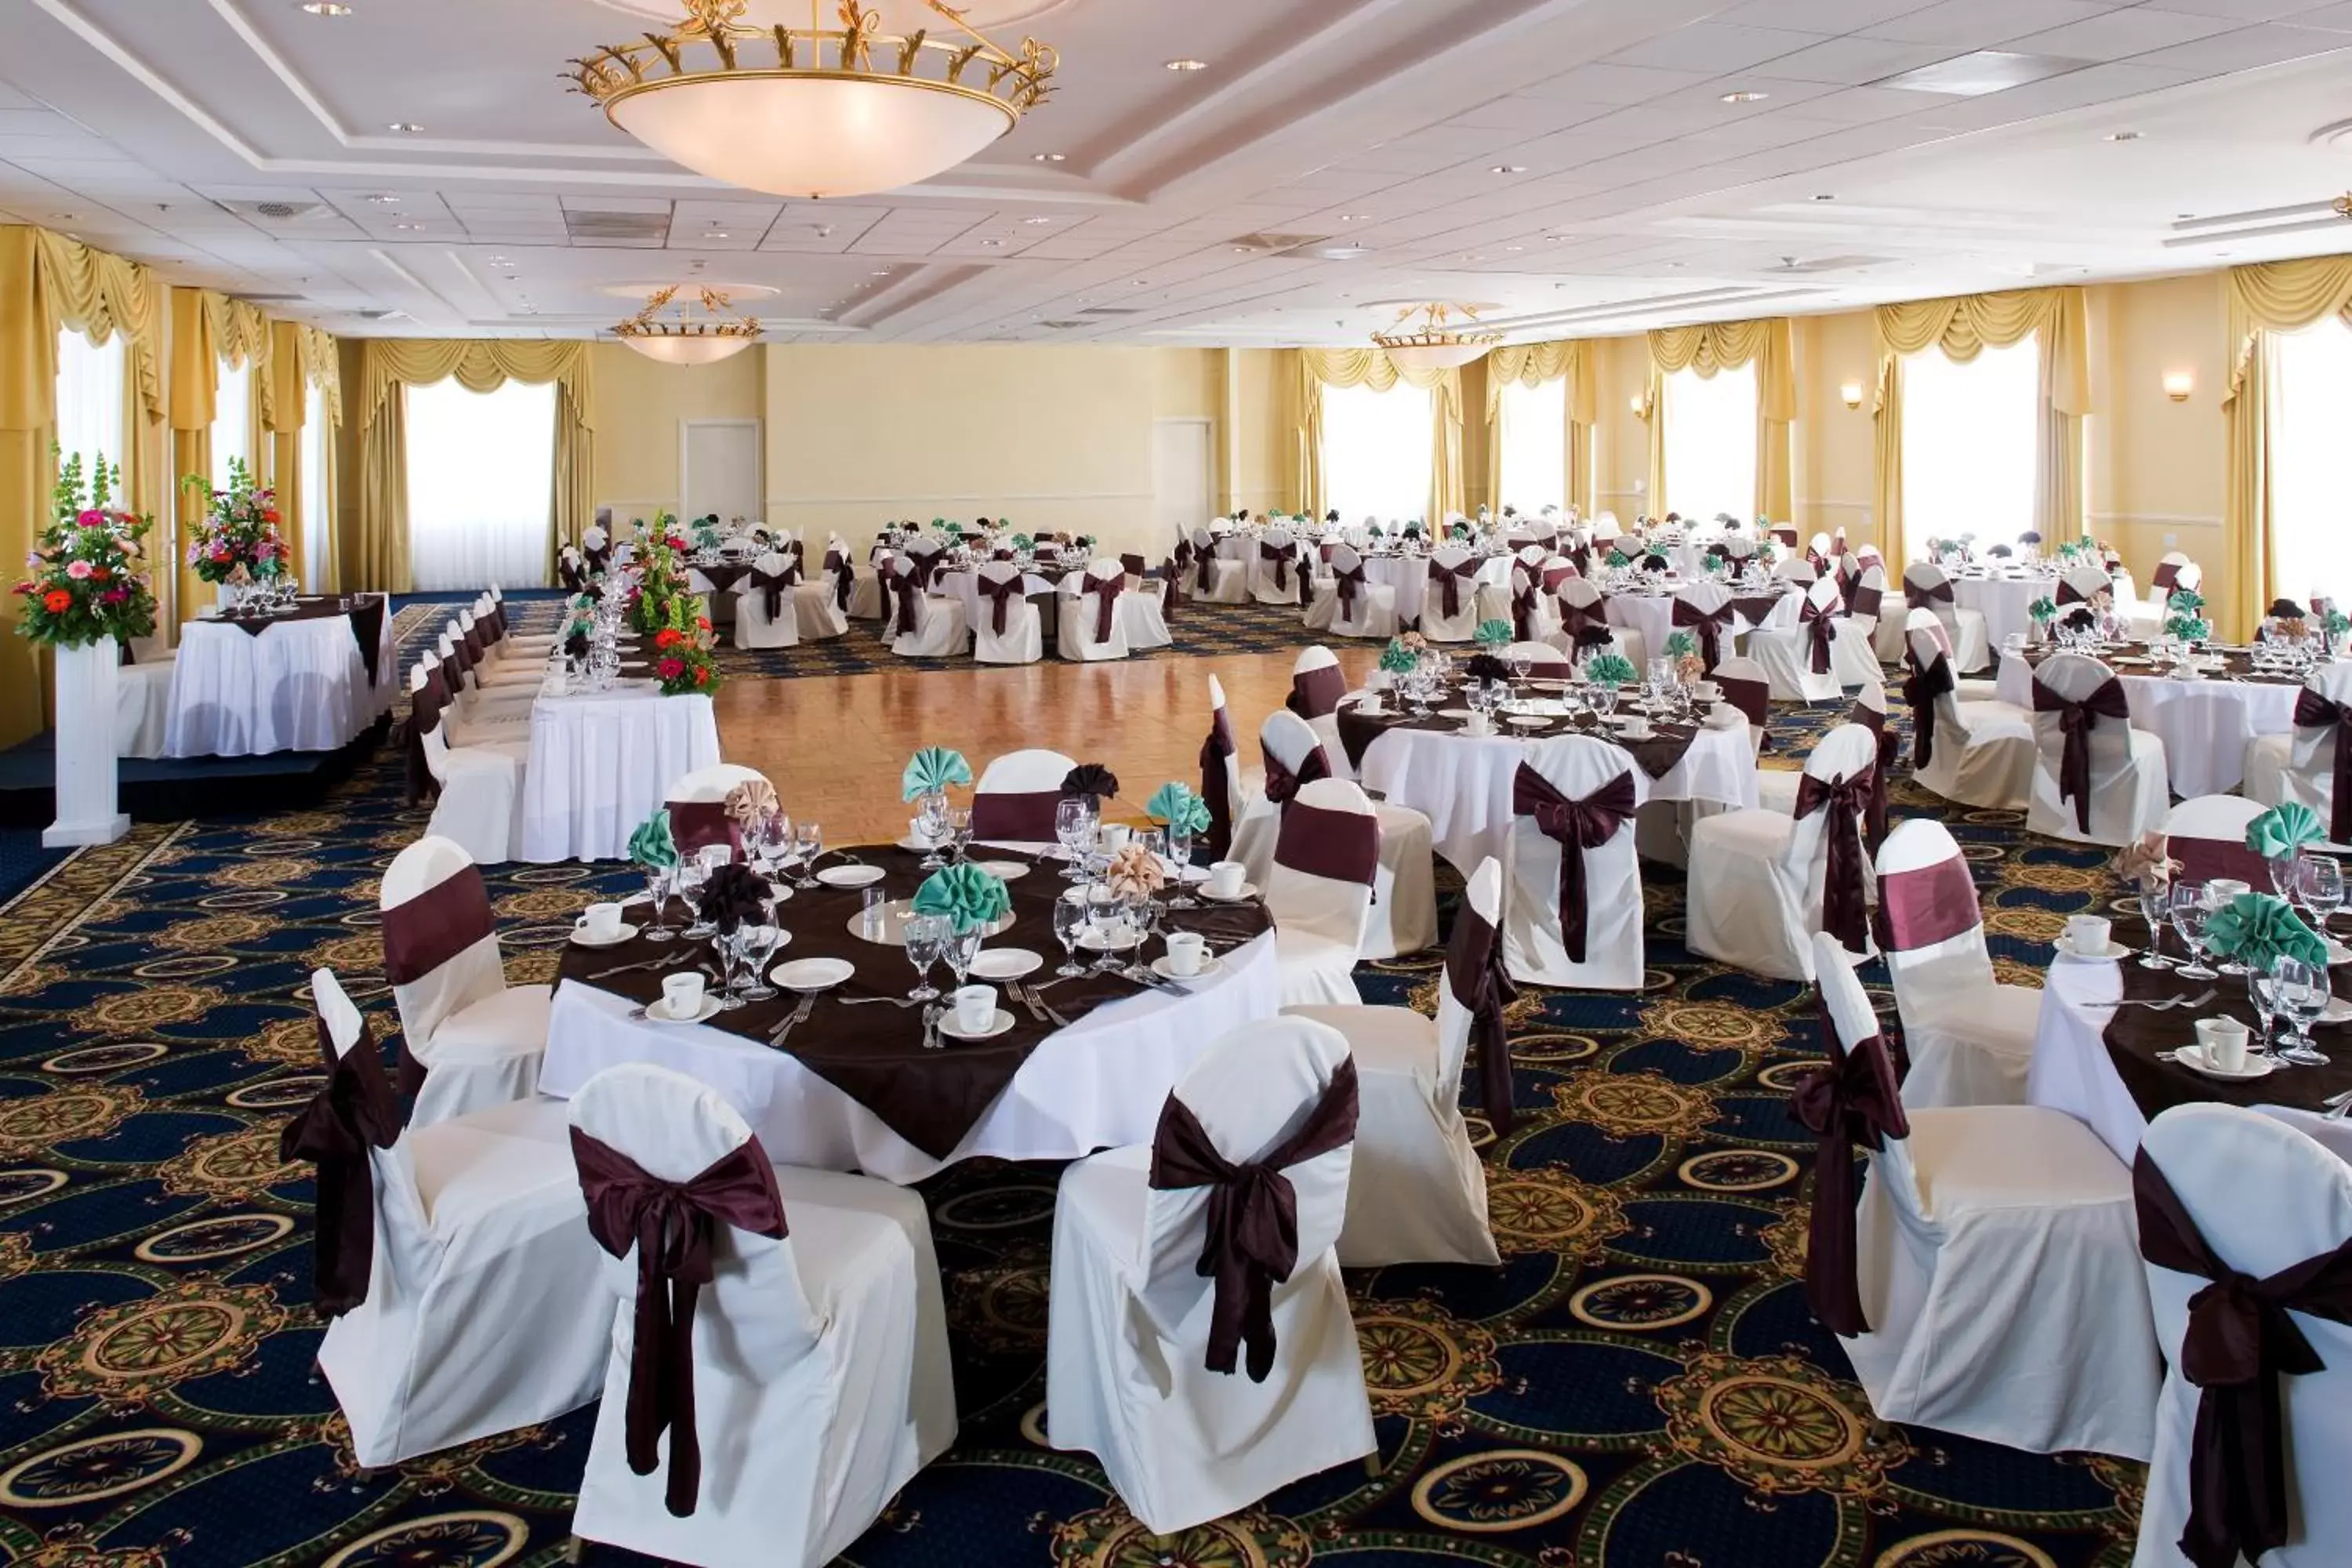 Banquet/Function facilities, Banquet Facilities in Knott's Berry Farm Hotel